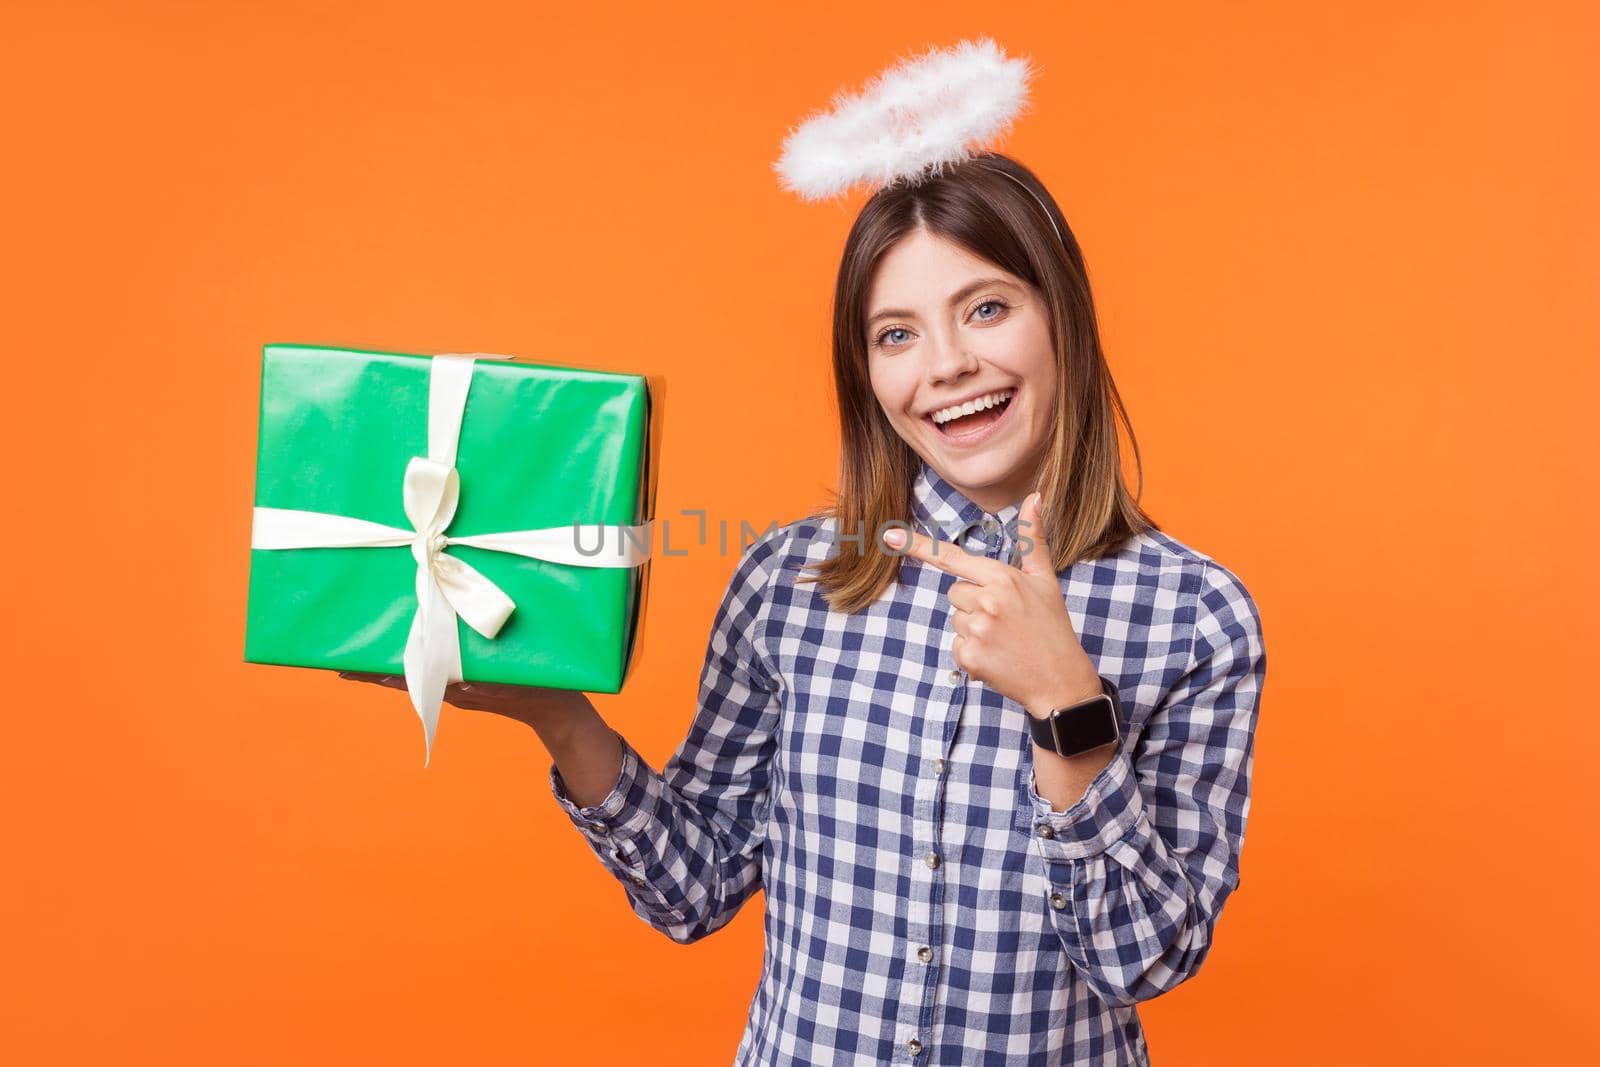 Portrait of angelic positive brunette woman with charming smile wearing checkered shirt standing with halo on head and pointing at gift box, charity. indoor studio shot isolated on orange background